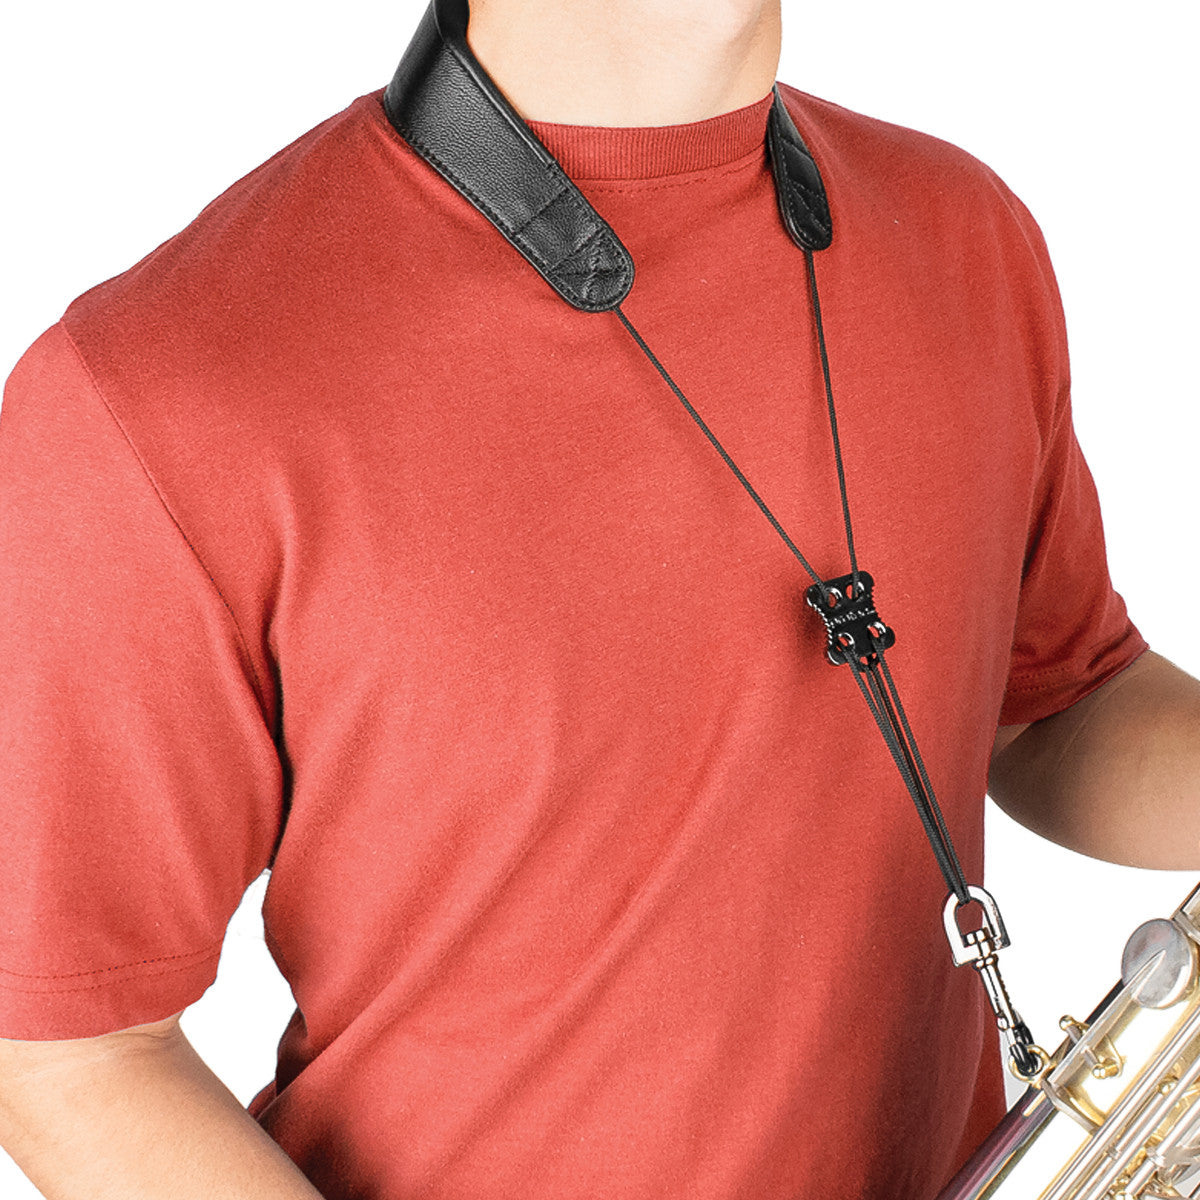 22" Saxophone Leather Neck Strap with Metal Snap